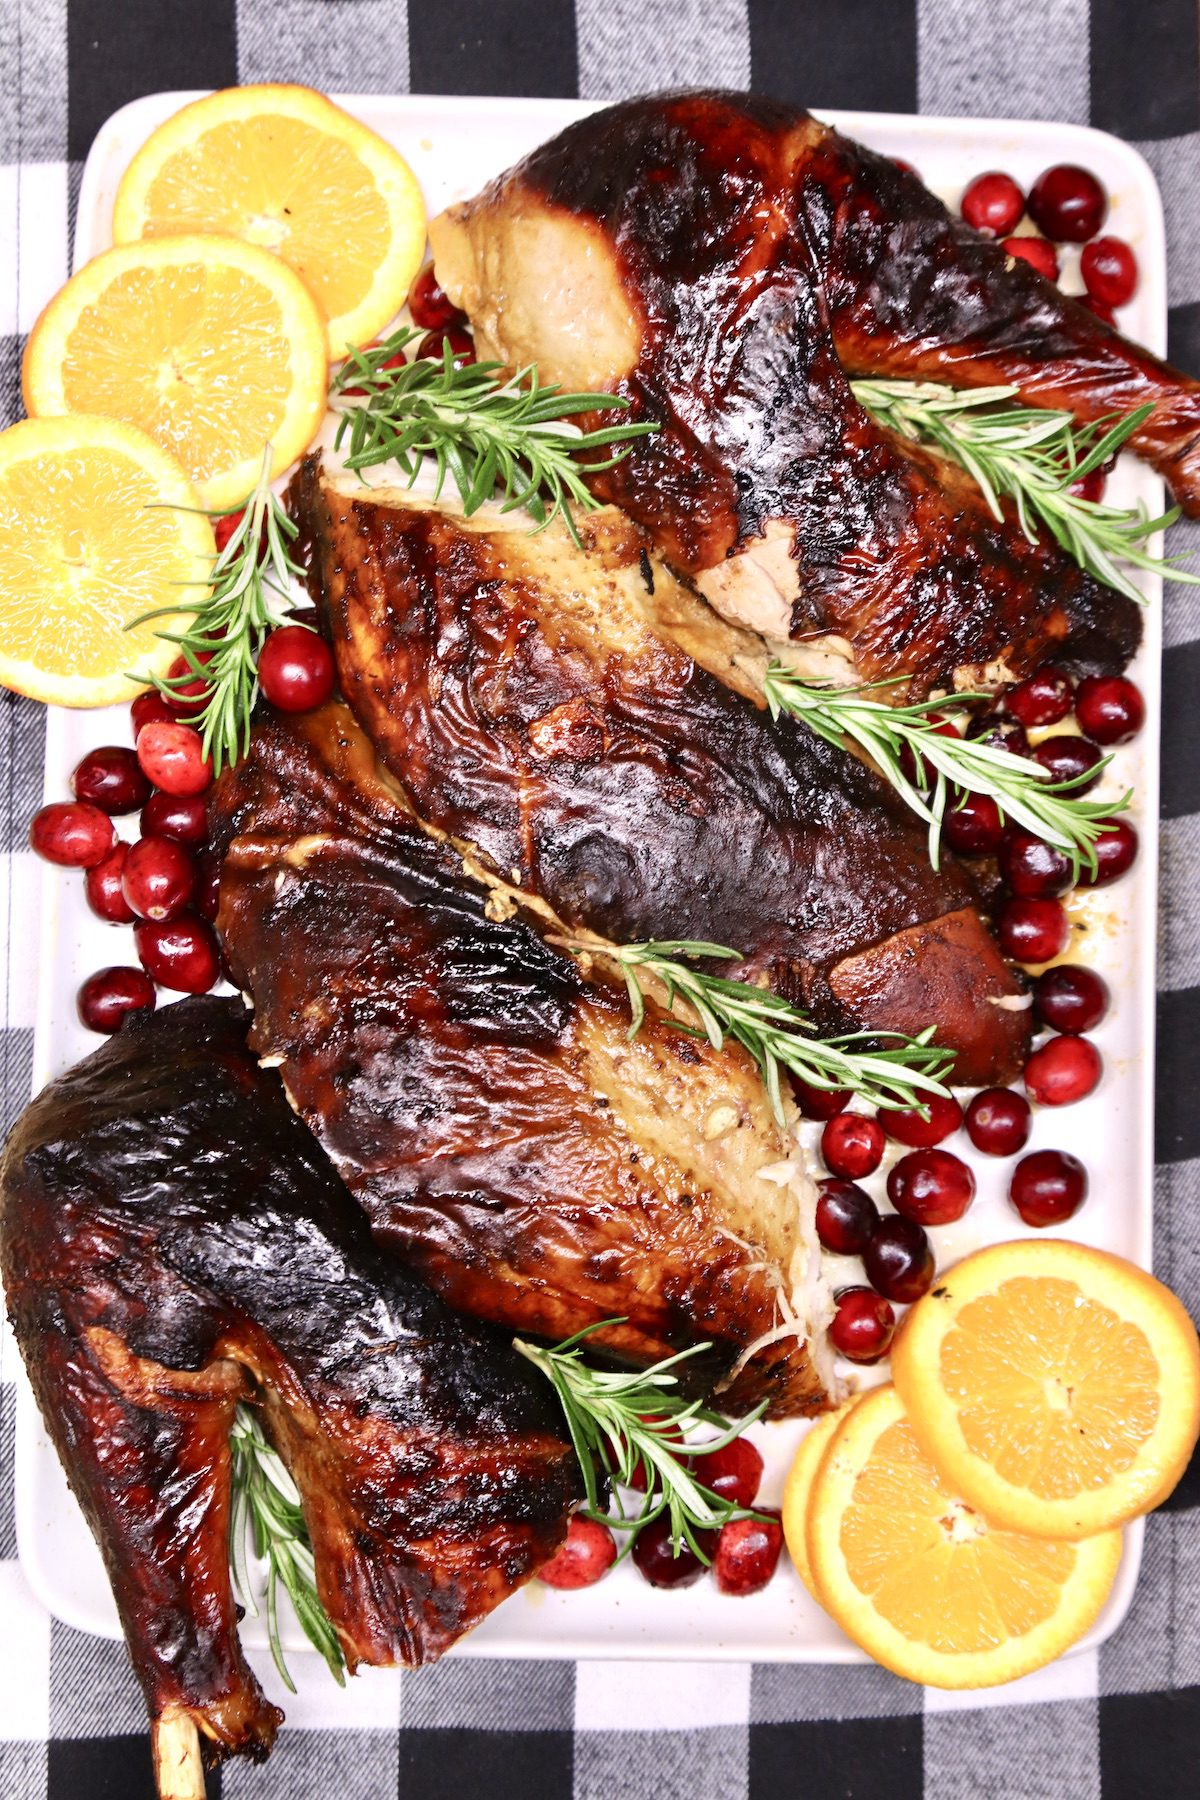 grilled turkey, cut up on a platter with oranges and cranberries